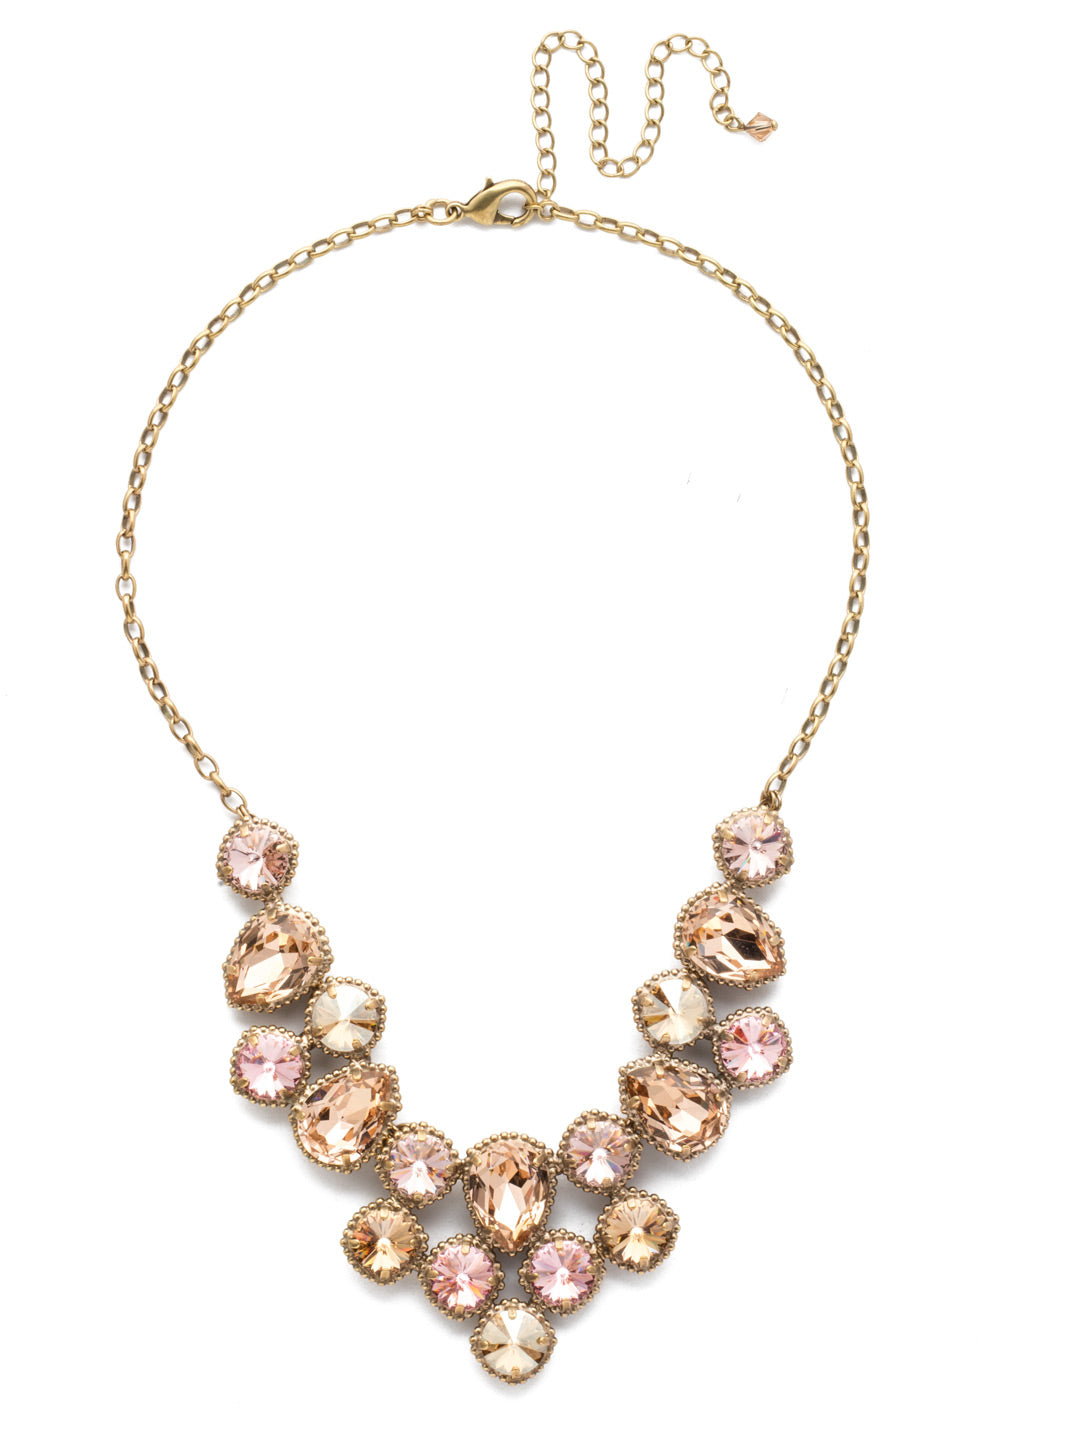 Armina Necklace Statement Necklace - NEA43AGBCM - <p>Bubbly and beautiful! This absolutely stunning bib necklace features round and pear shaped crystals arranged together in a symmetrical yet free flowing design. From Sorrelli's Beach Comber collection in our Antique Gold-tone finish.</p>